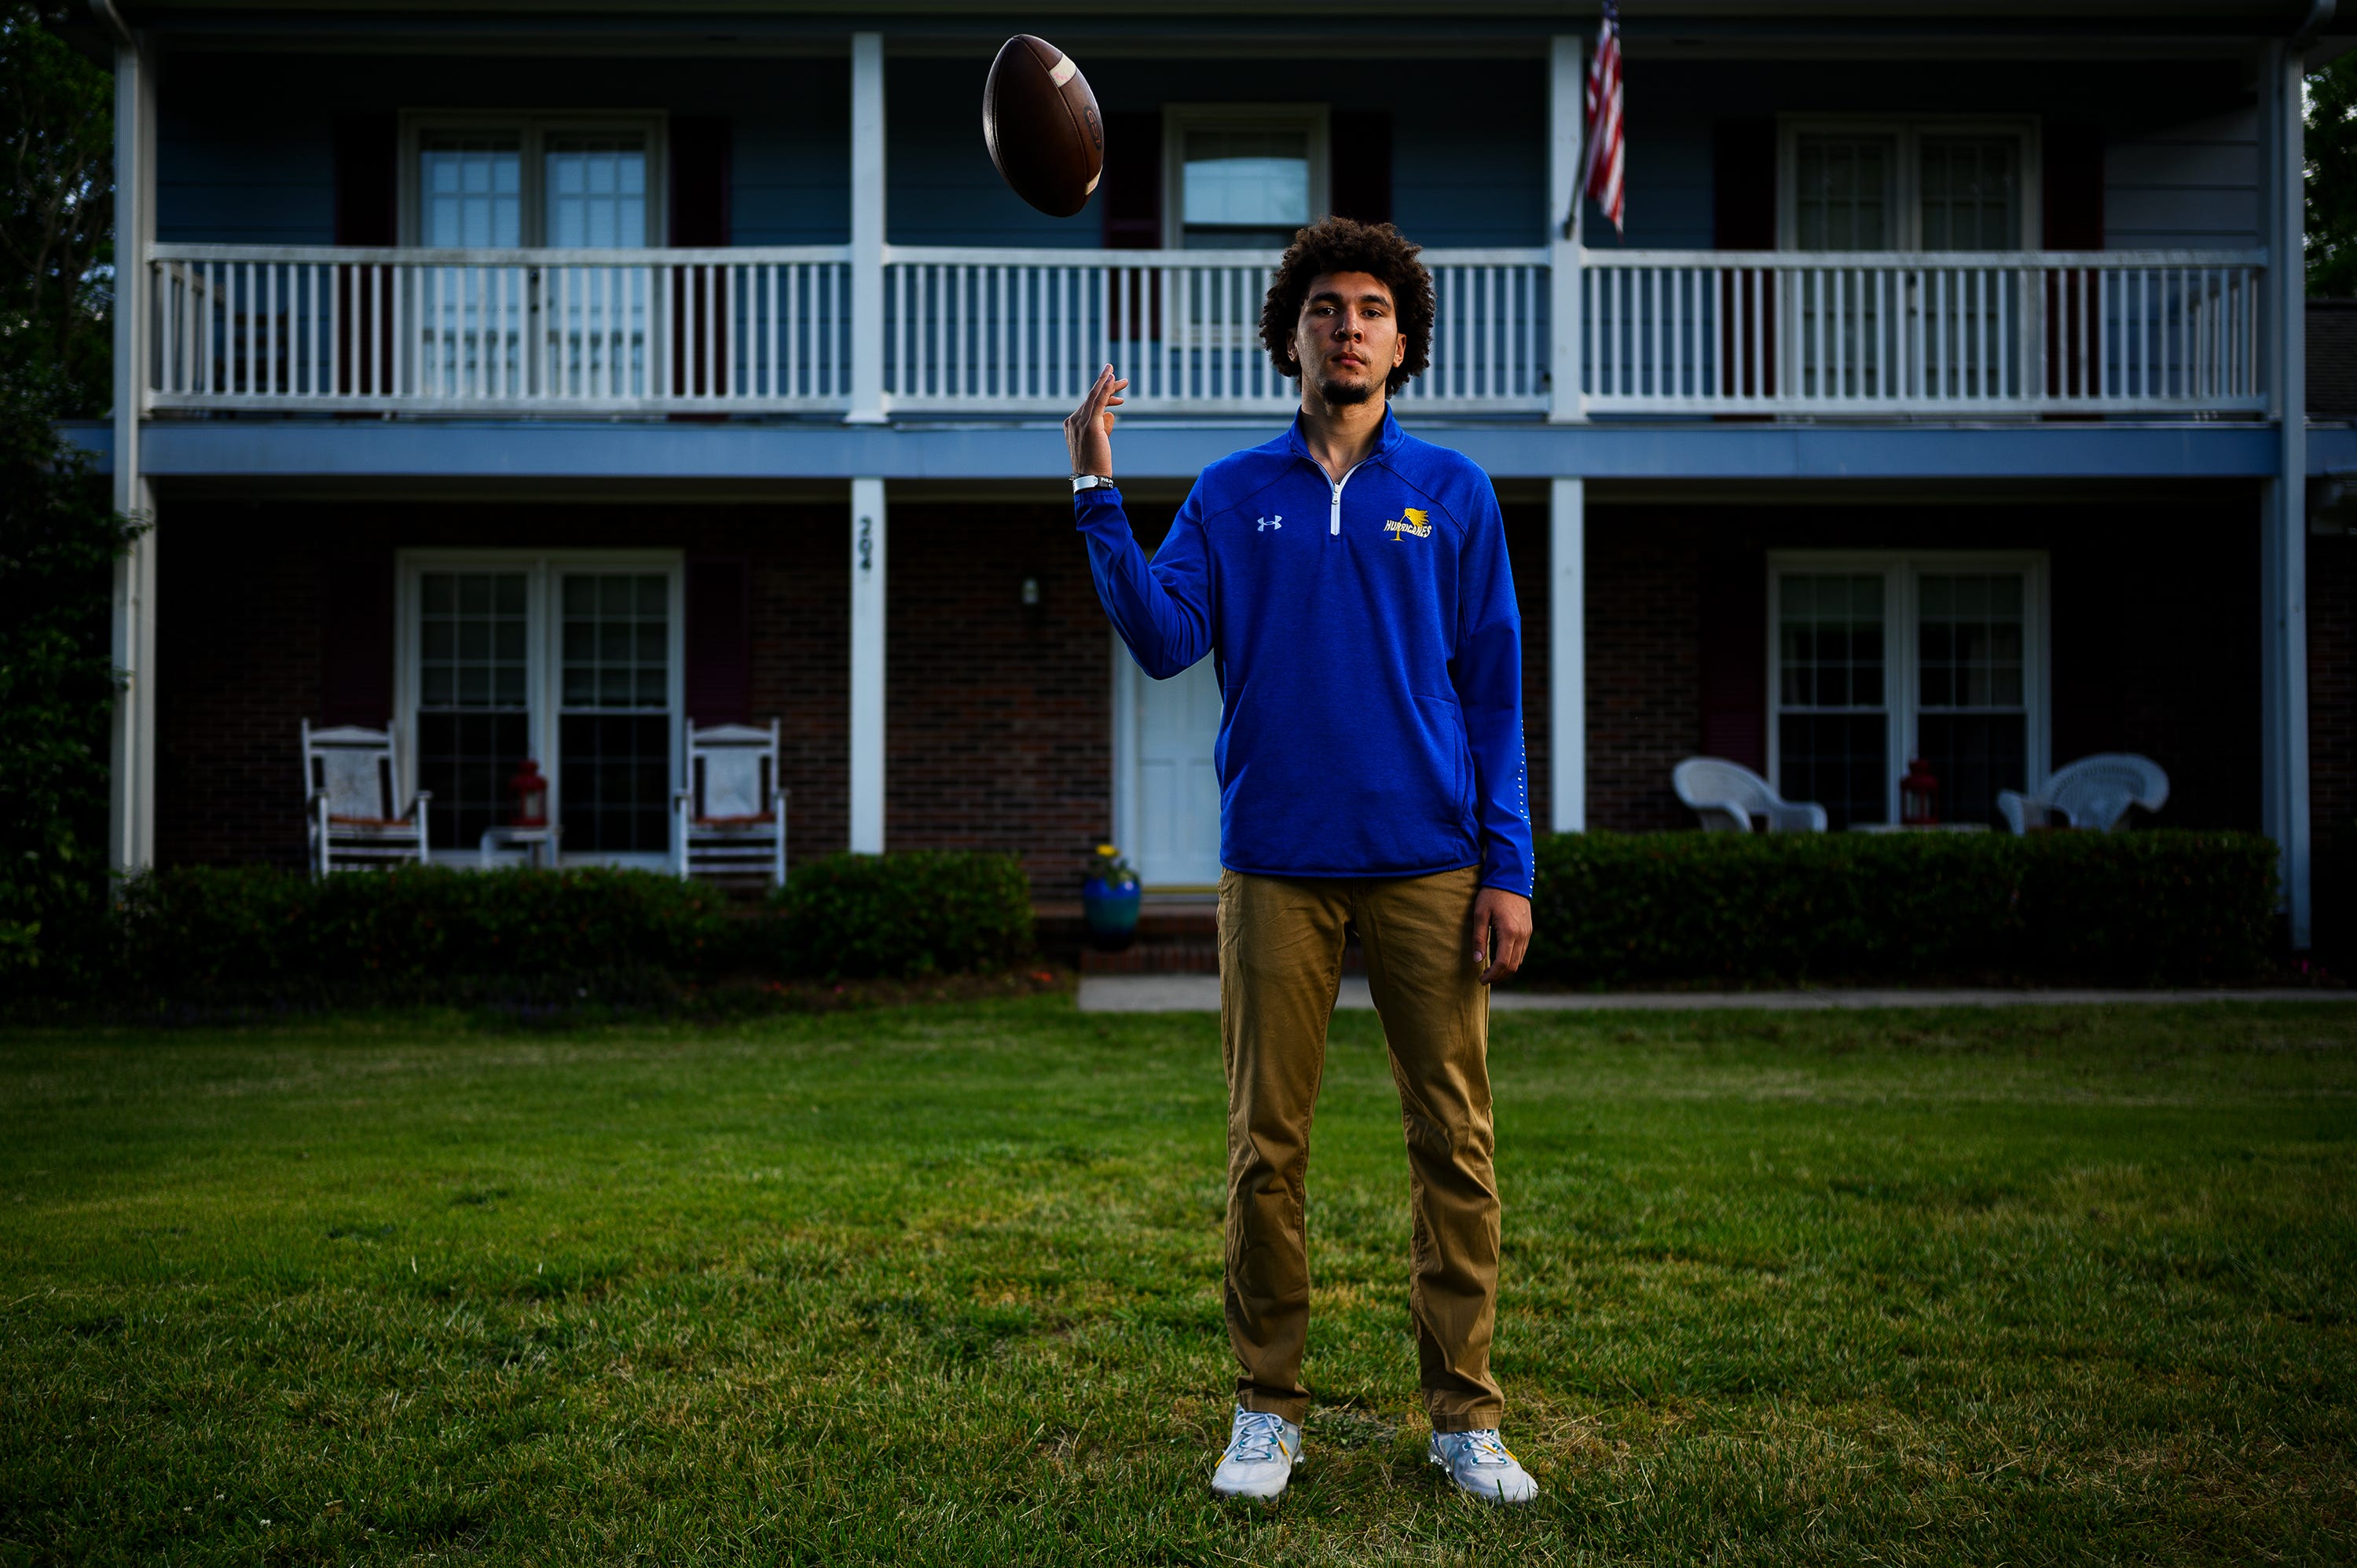 Wren High School's Joe Owens poses for a portrait in front of his home Tuesday, April 28, 2020. Owens is The Greenville New's 2019-20 All-Upstate football player of the year.